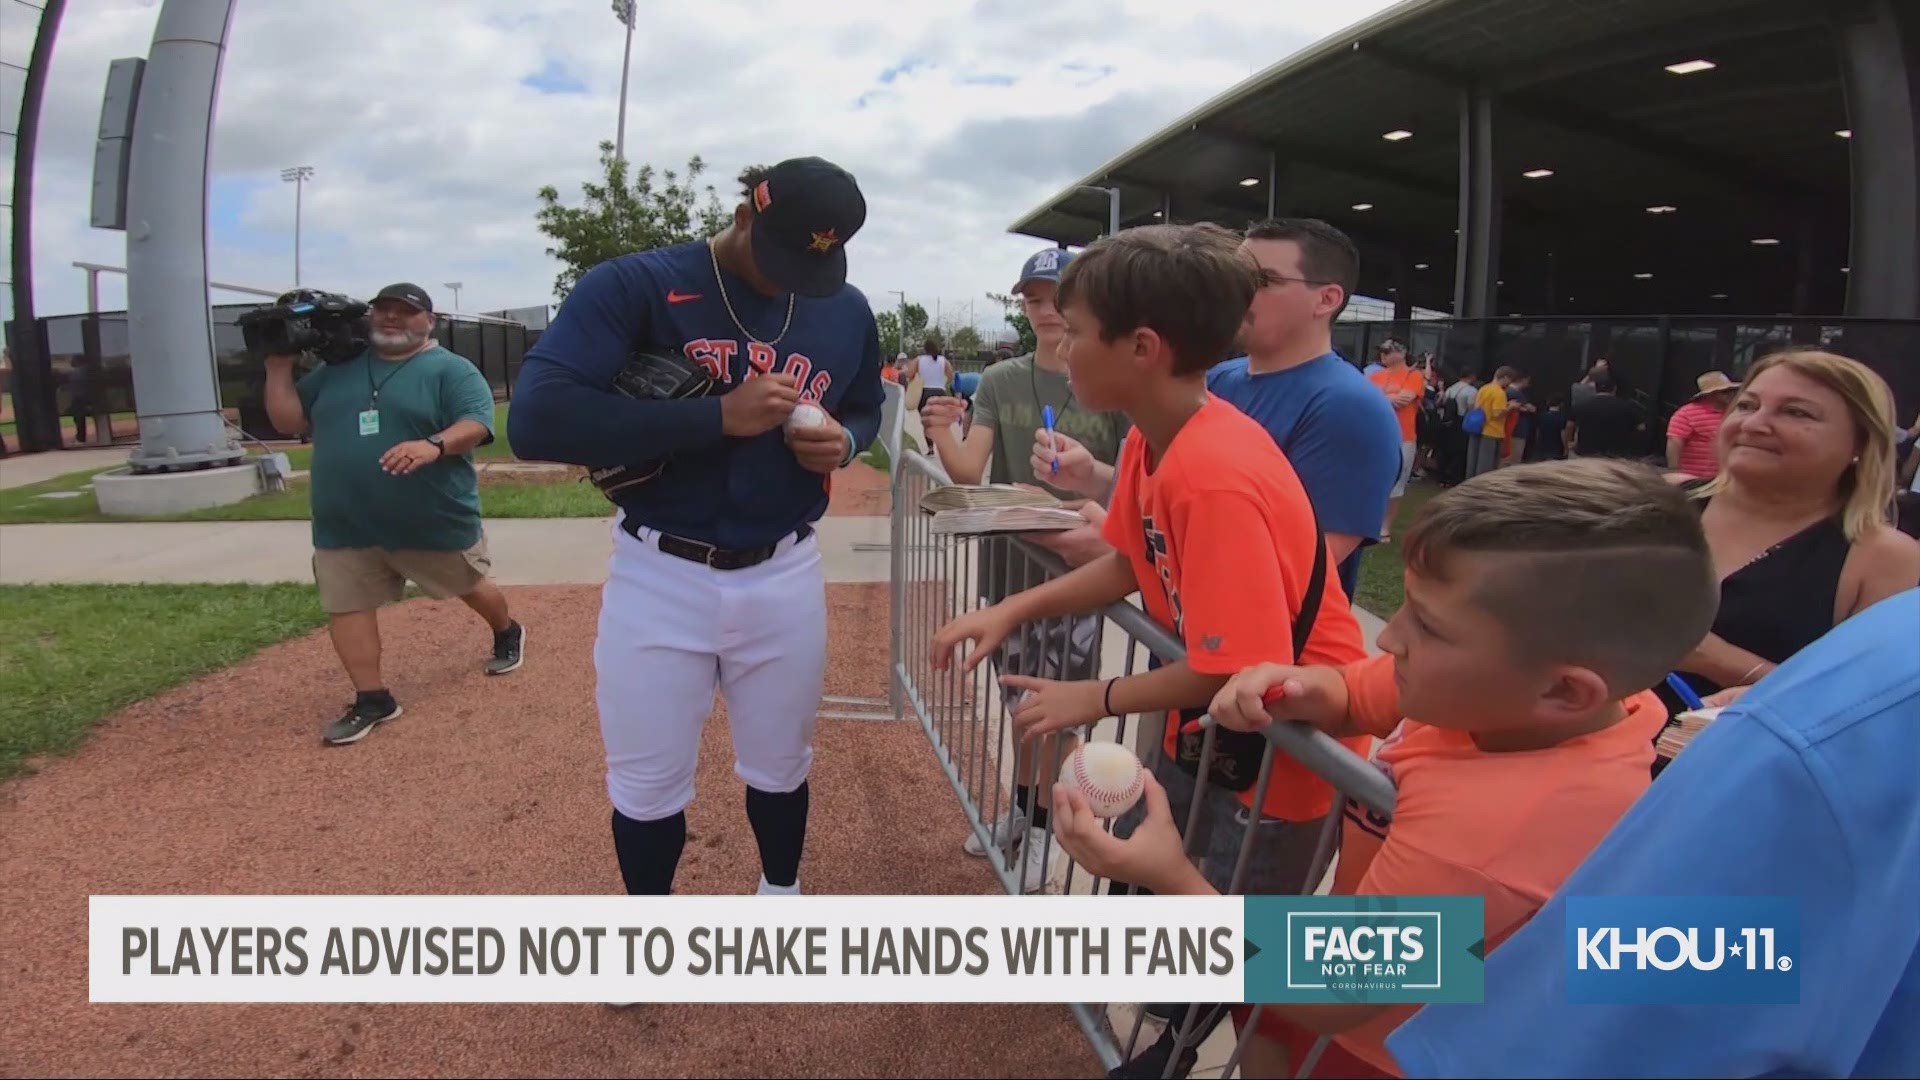 The Houston Astros organization is changing the way players greet fans and sign autographs during spring training amid COVID-19 concerns.